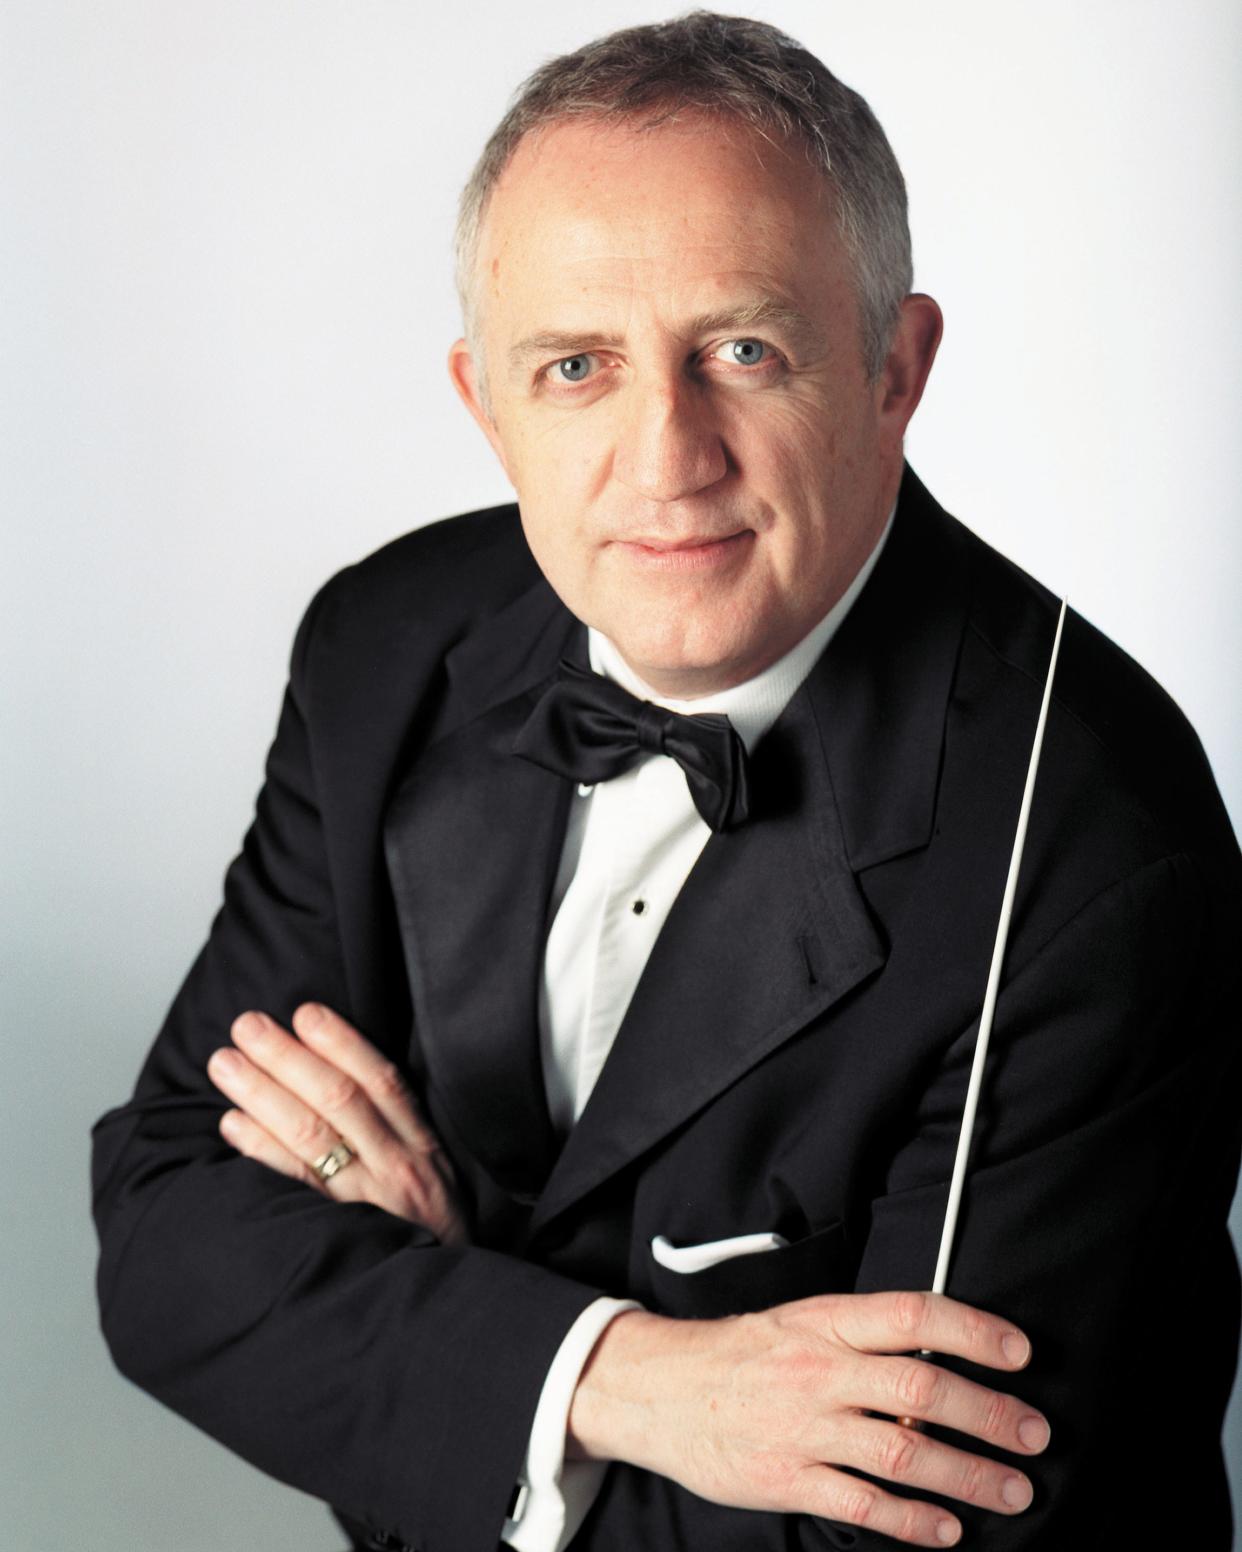 In its 2022-23 season, the Sarasota Orchestra will honor the legacy and short tenure of Music Director Bramwell Tovey, who died in July at 69 before he could fully take over artistic leadership of the organization.